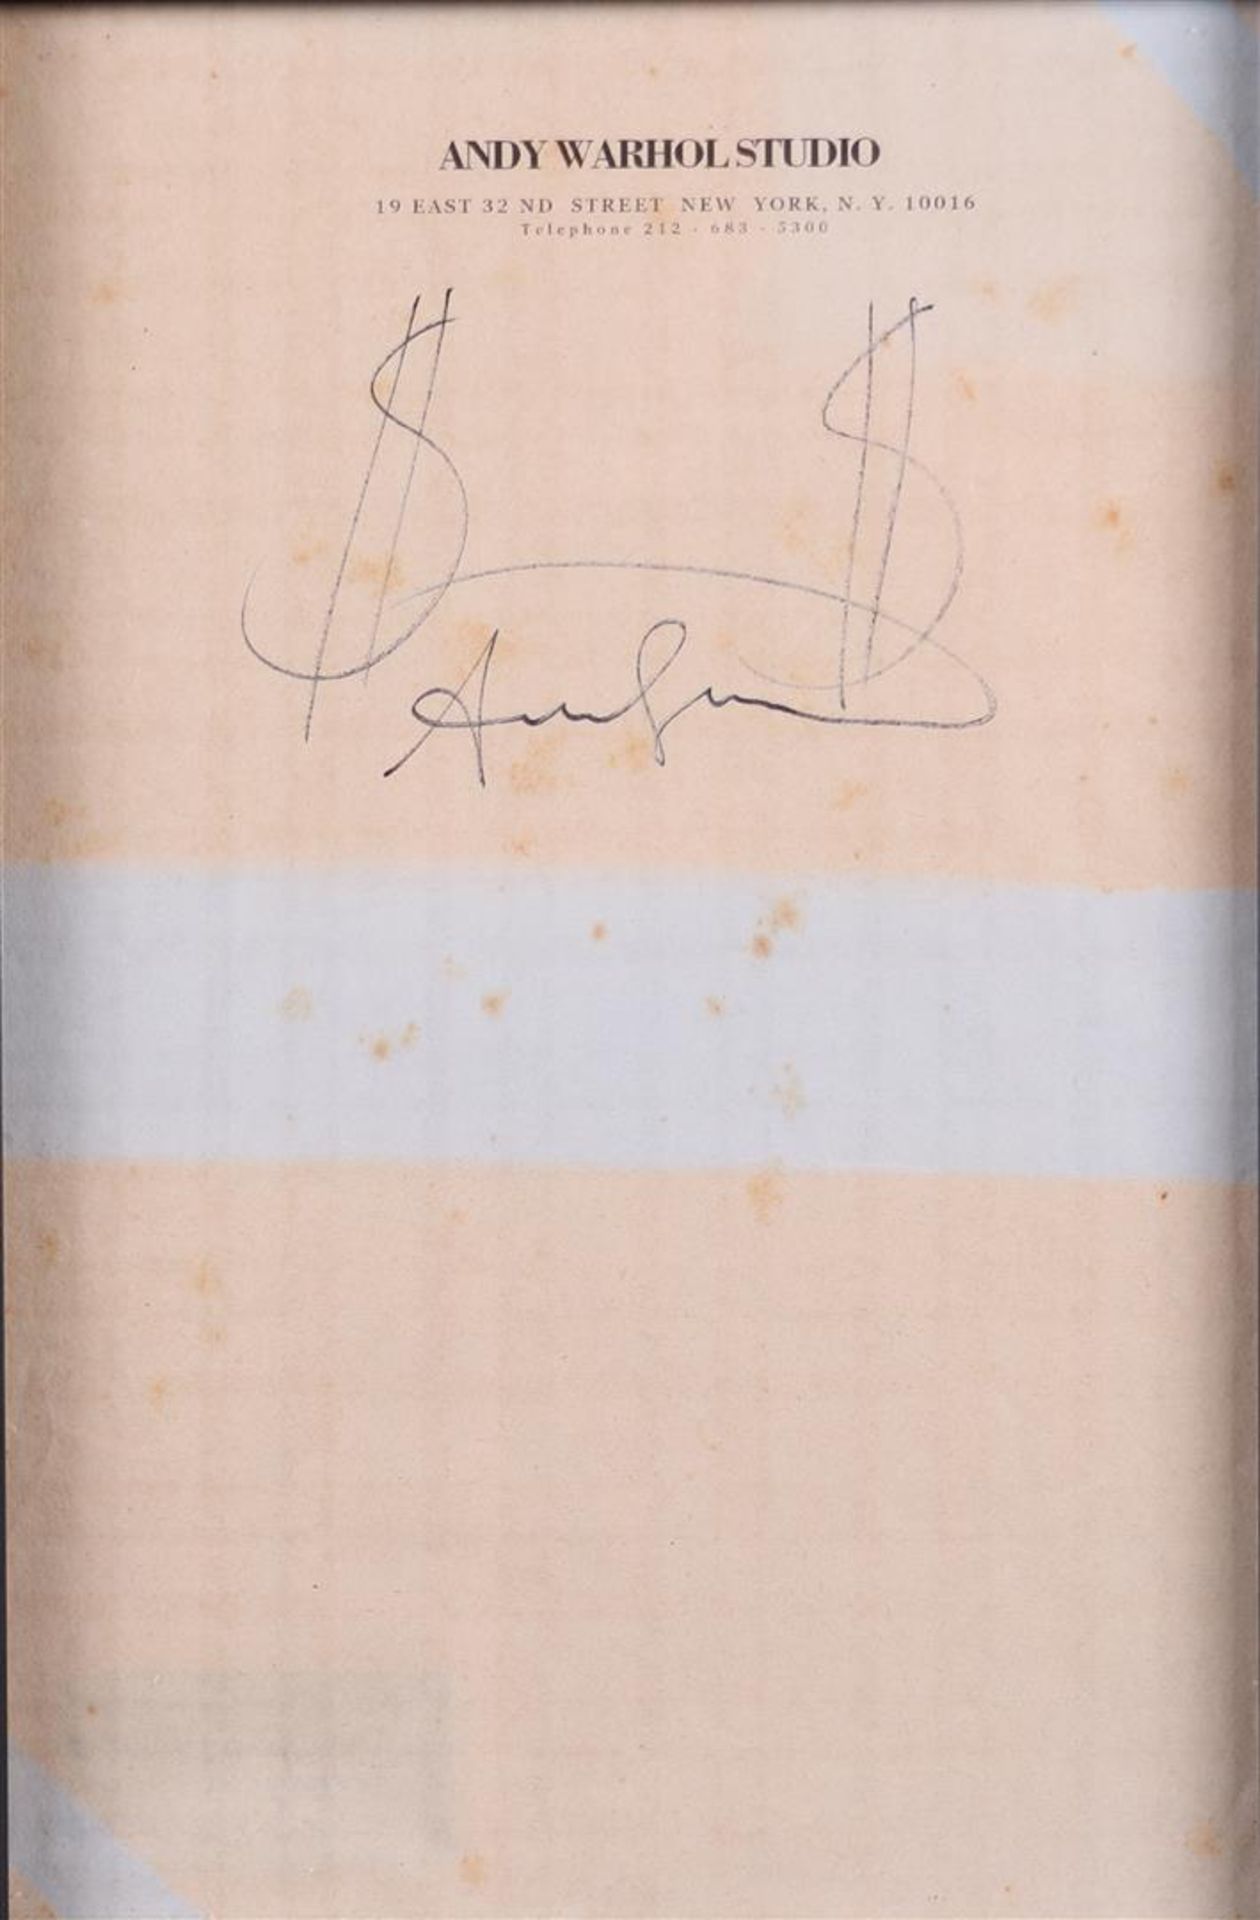 Andy Warhol (Pittsburg 1928 - 1987 New York), (after), Dollar Signes, on stationery, with signature,